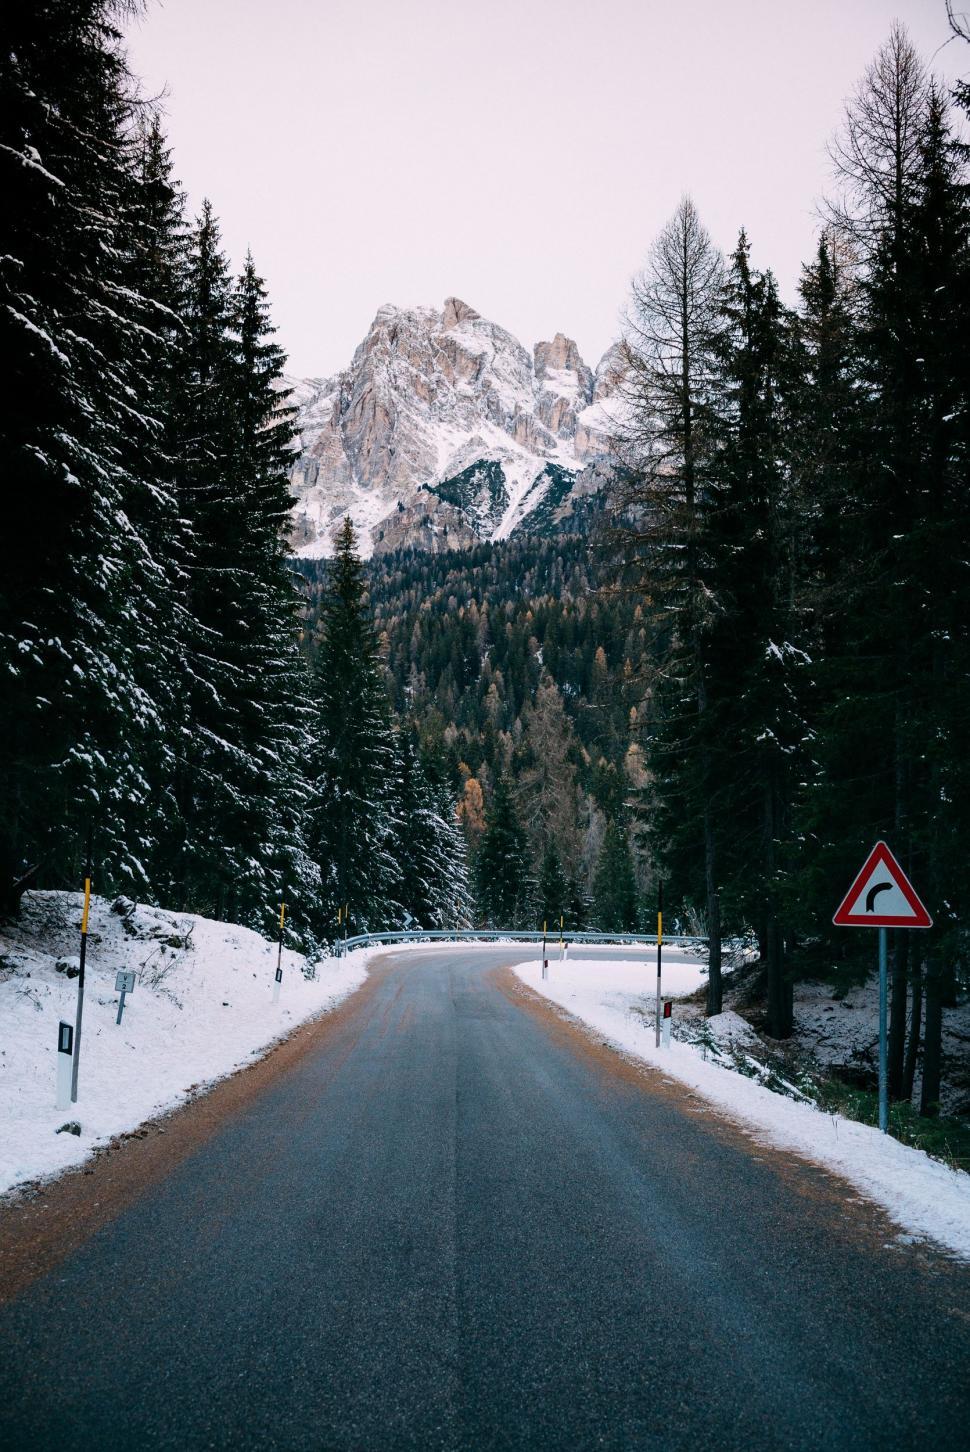 Free Image of Snowy Road With Mountain Background 